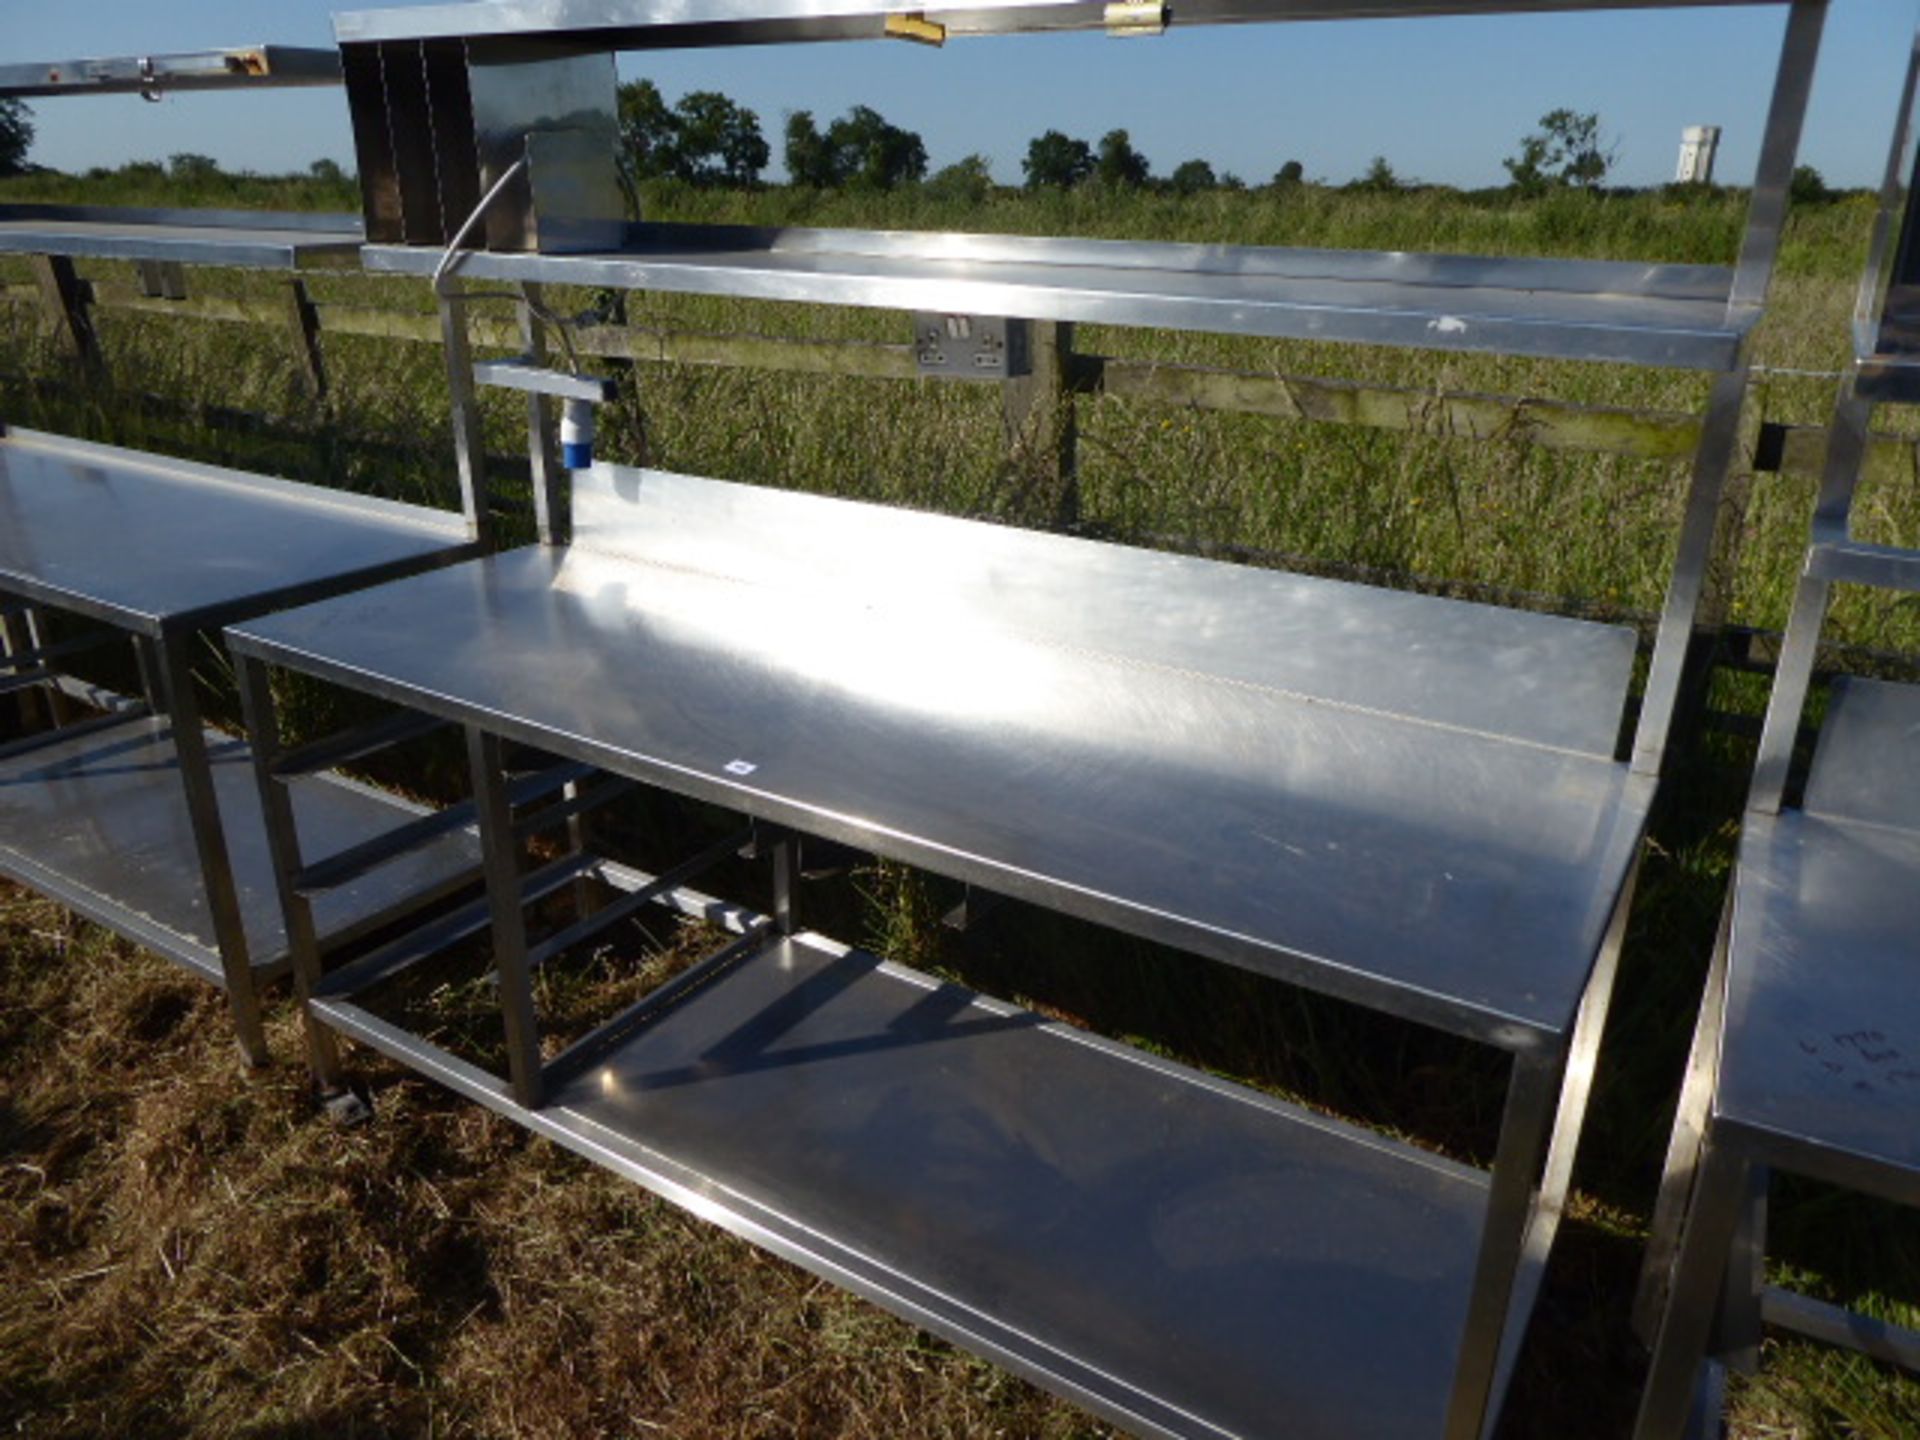 Stainless steel mobile food preparation station with 2 shelves over, shelf under space for trays, - Image 2 of 2